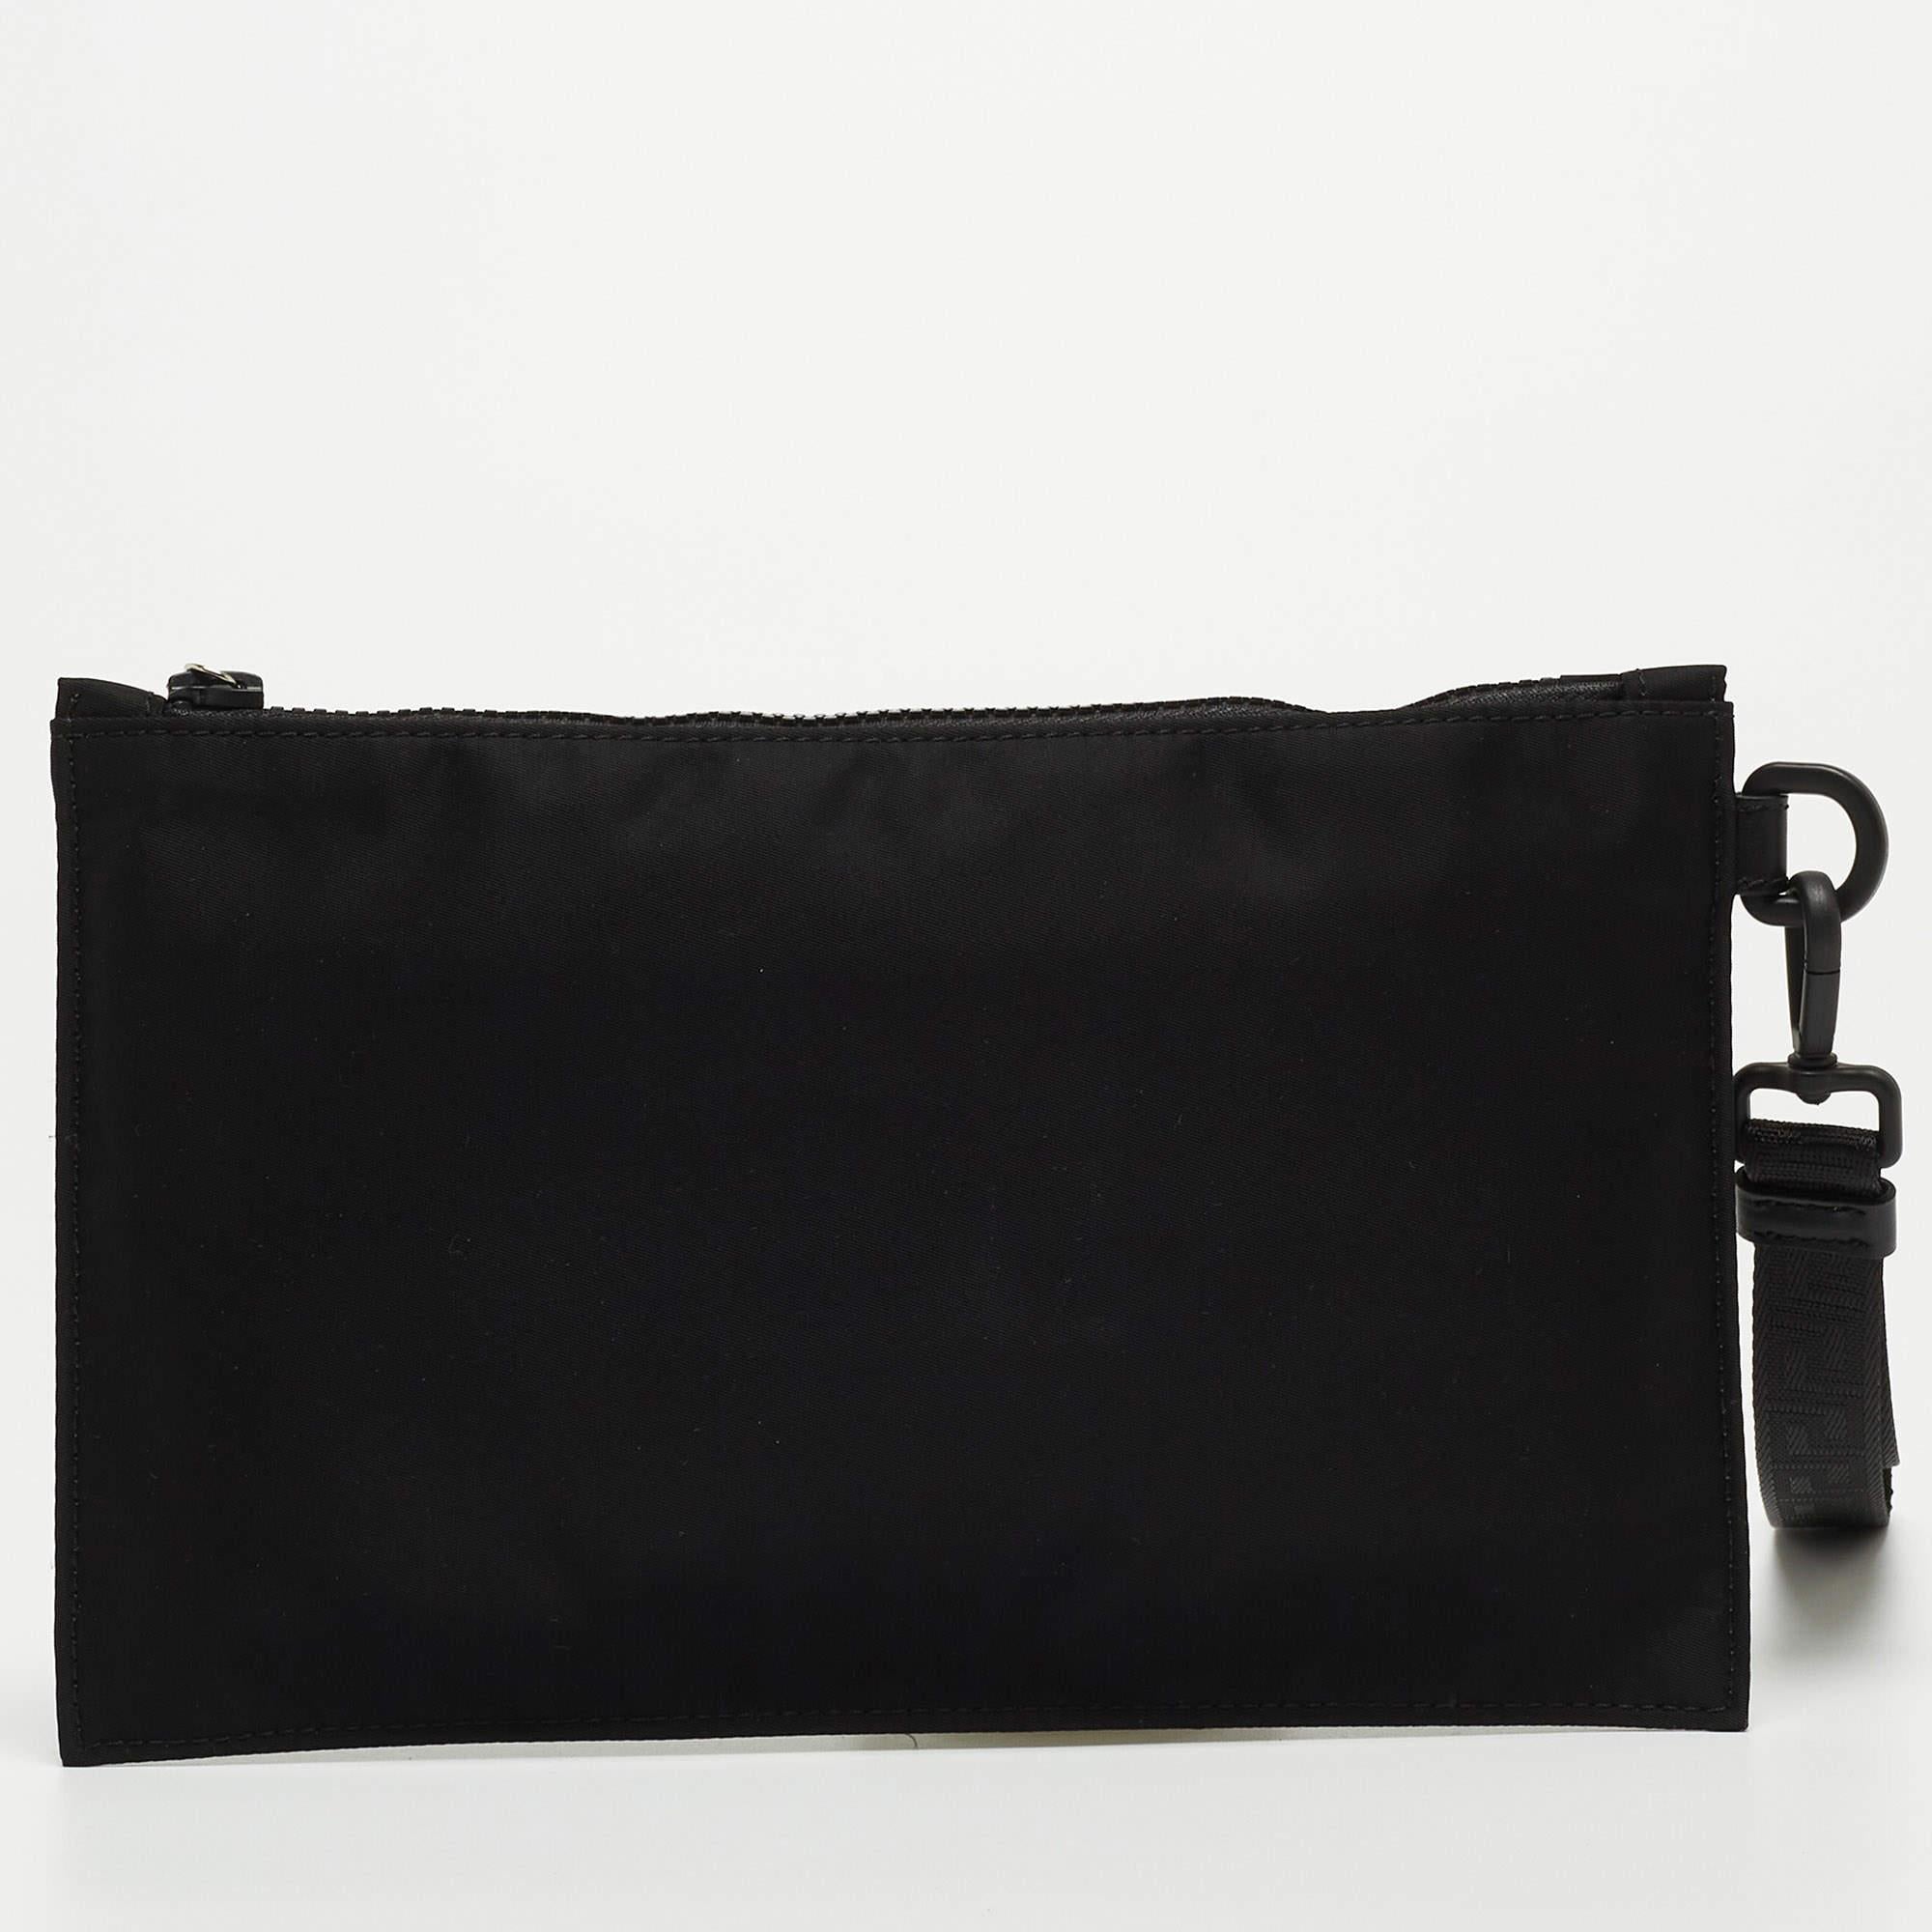 This pouch is such a stylish fashion-meets-function accessory you'll love carrying it all the time. Crafted from quality materials, it can easily fit your essentials.

Includes: Original Dustbag, Original Box, Info Booklet, Price Tag

